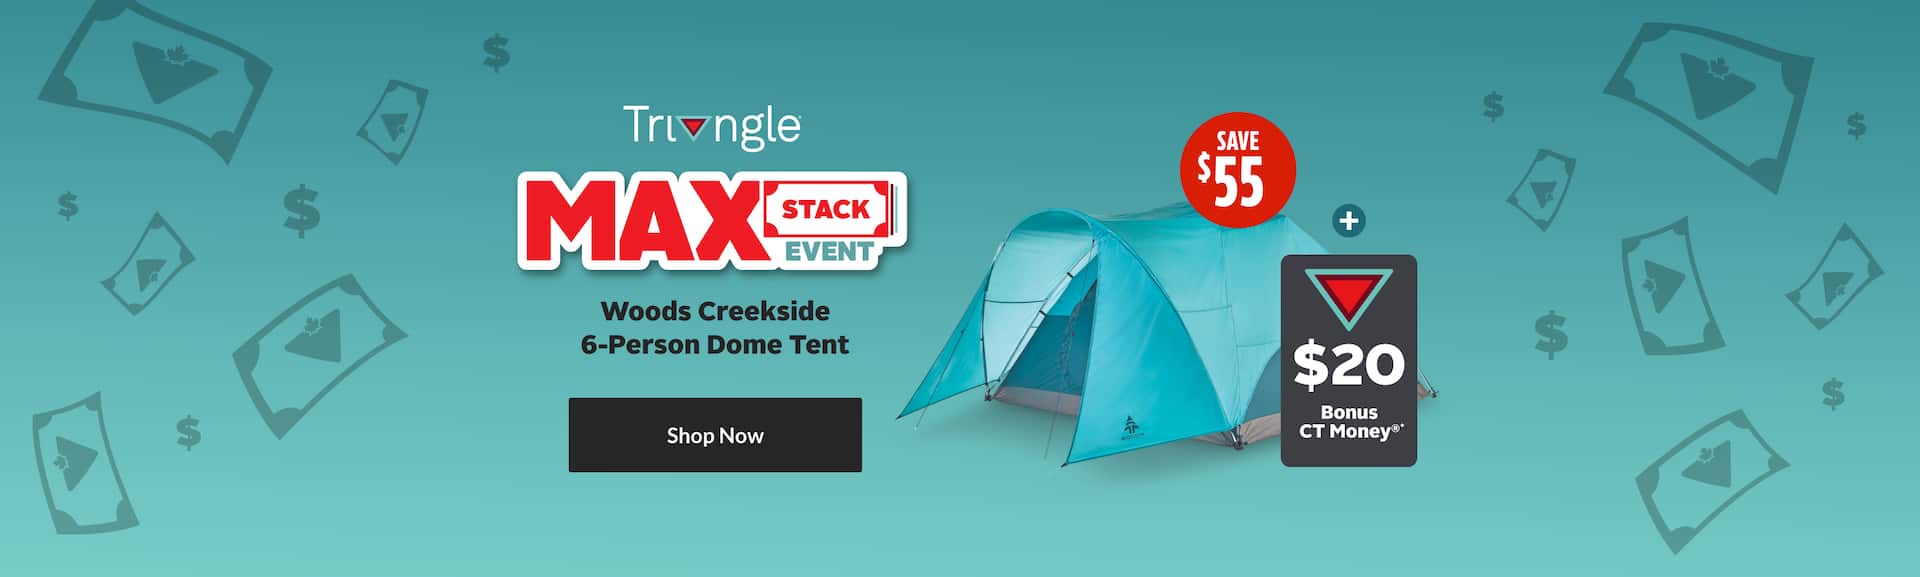 Woods Creekside 6-Person Dome Tent